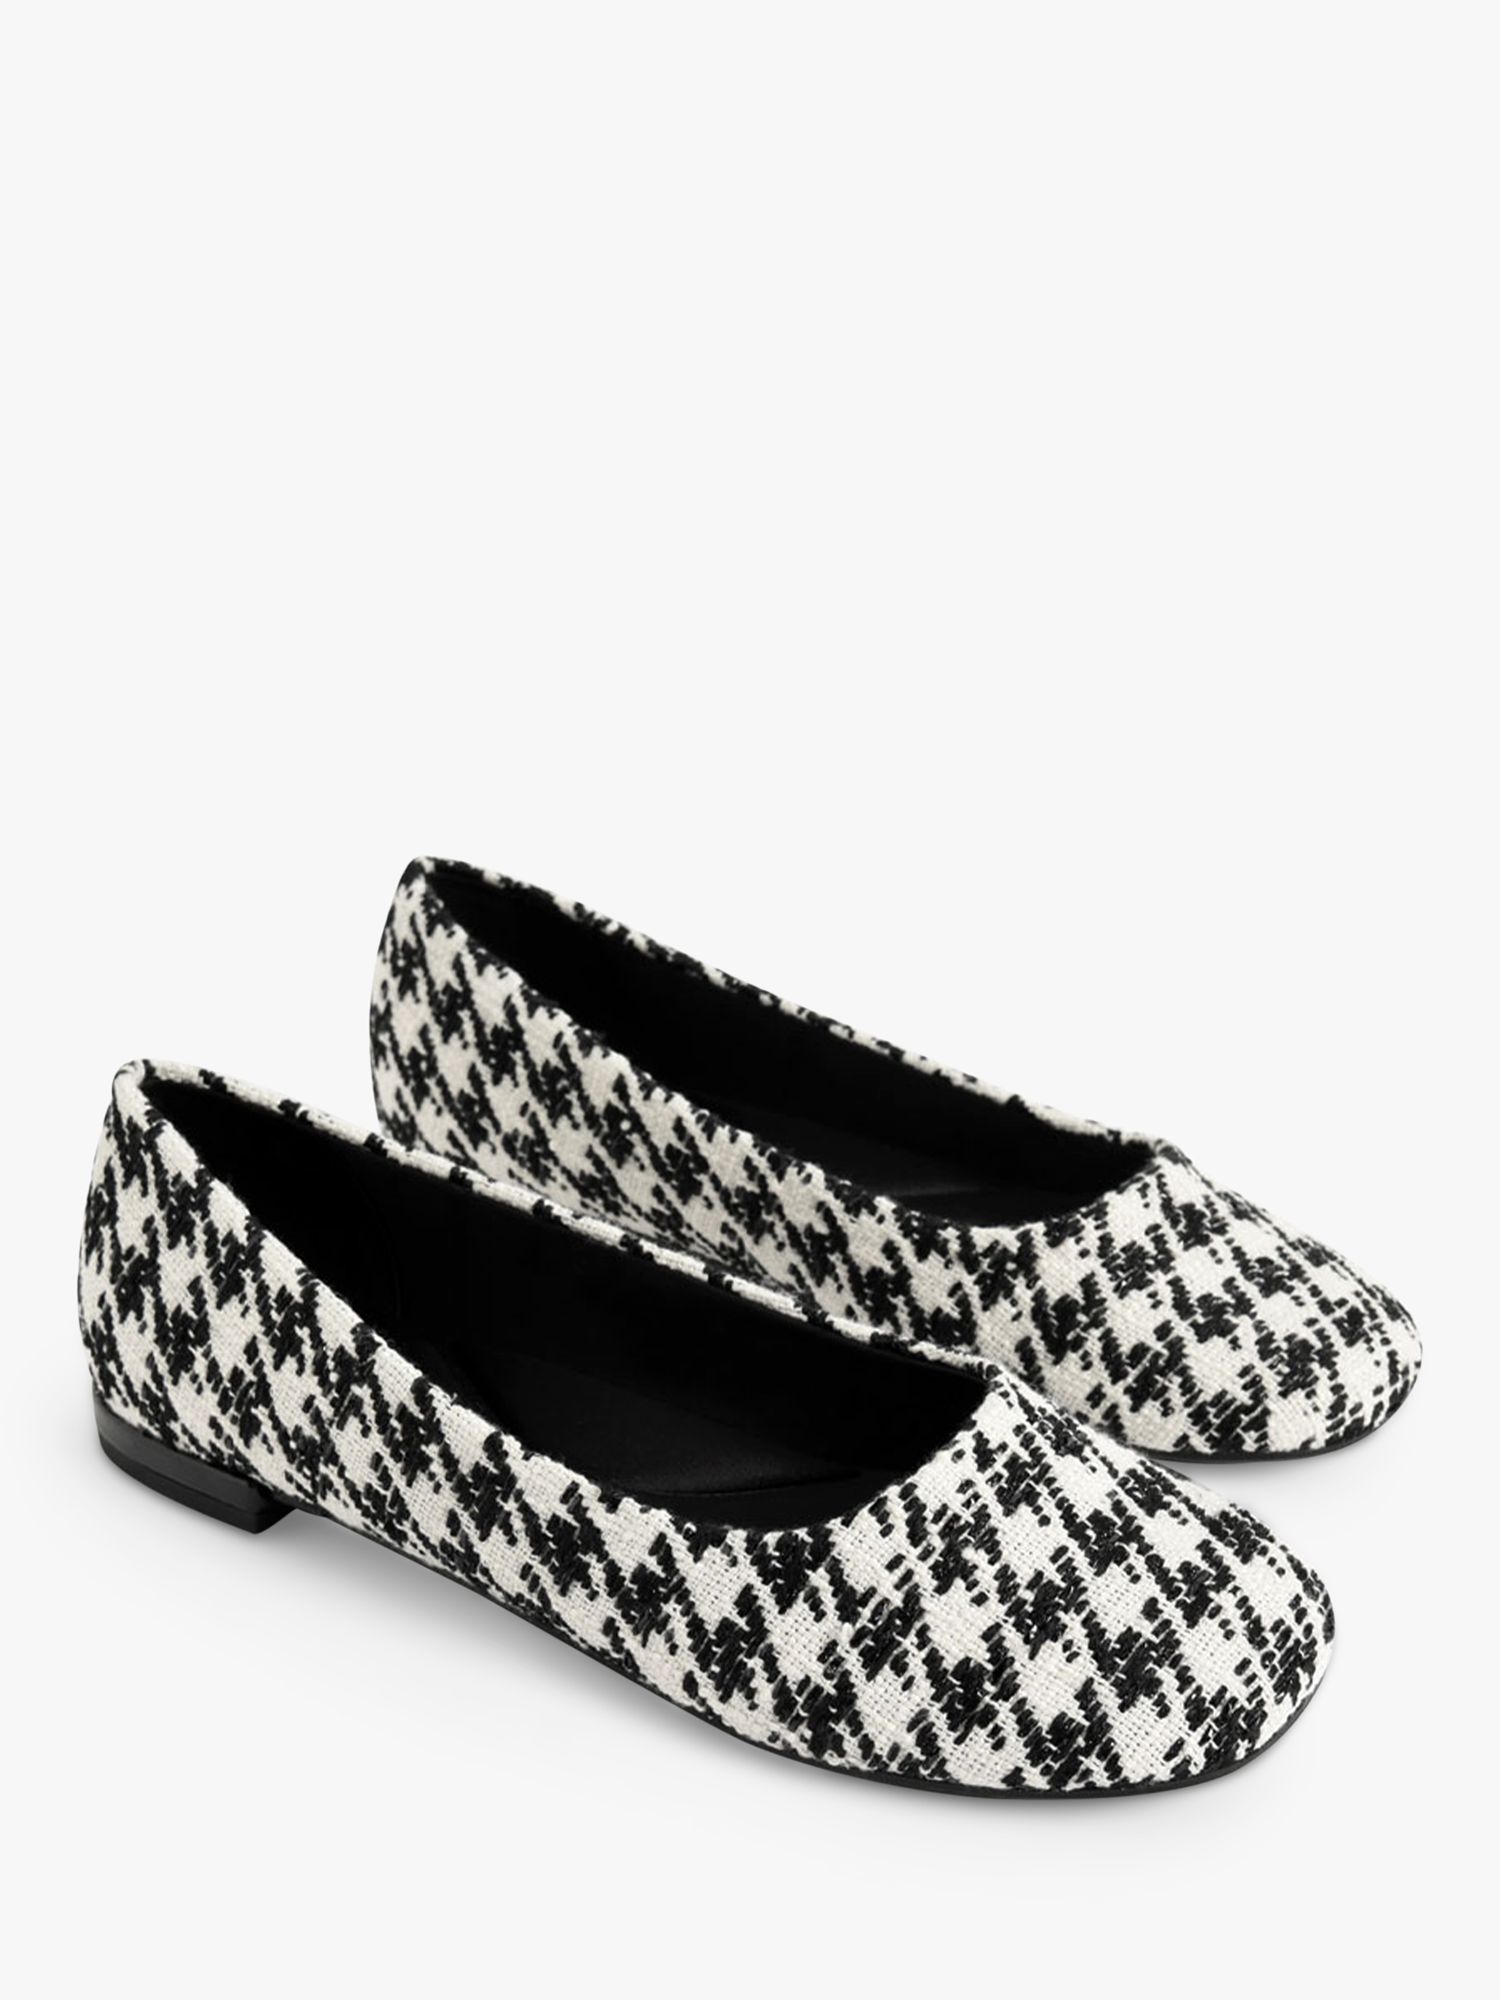 CHARLES & KEITH Dogtooth Ballet Pumps, Black/White at John Lewis & Partners